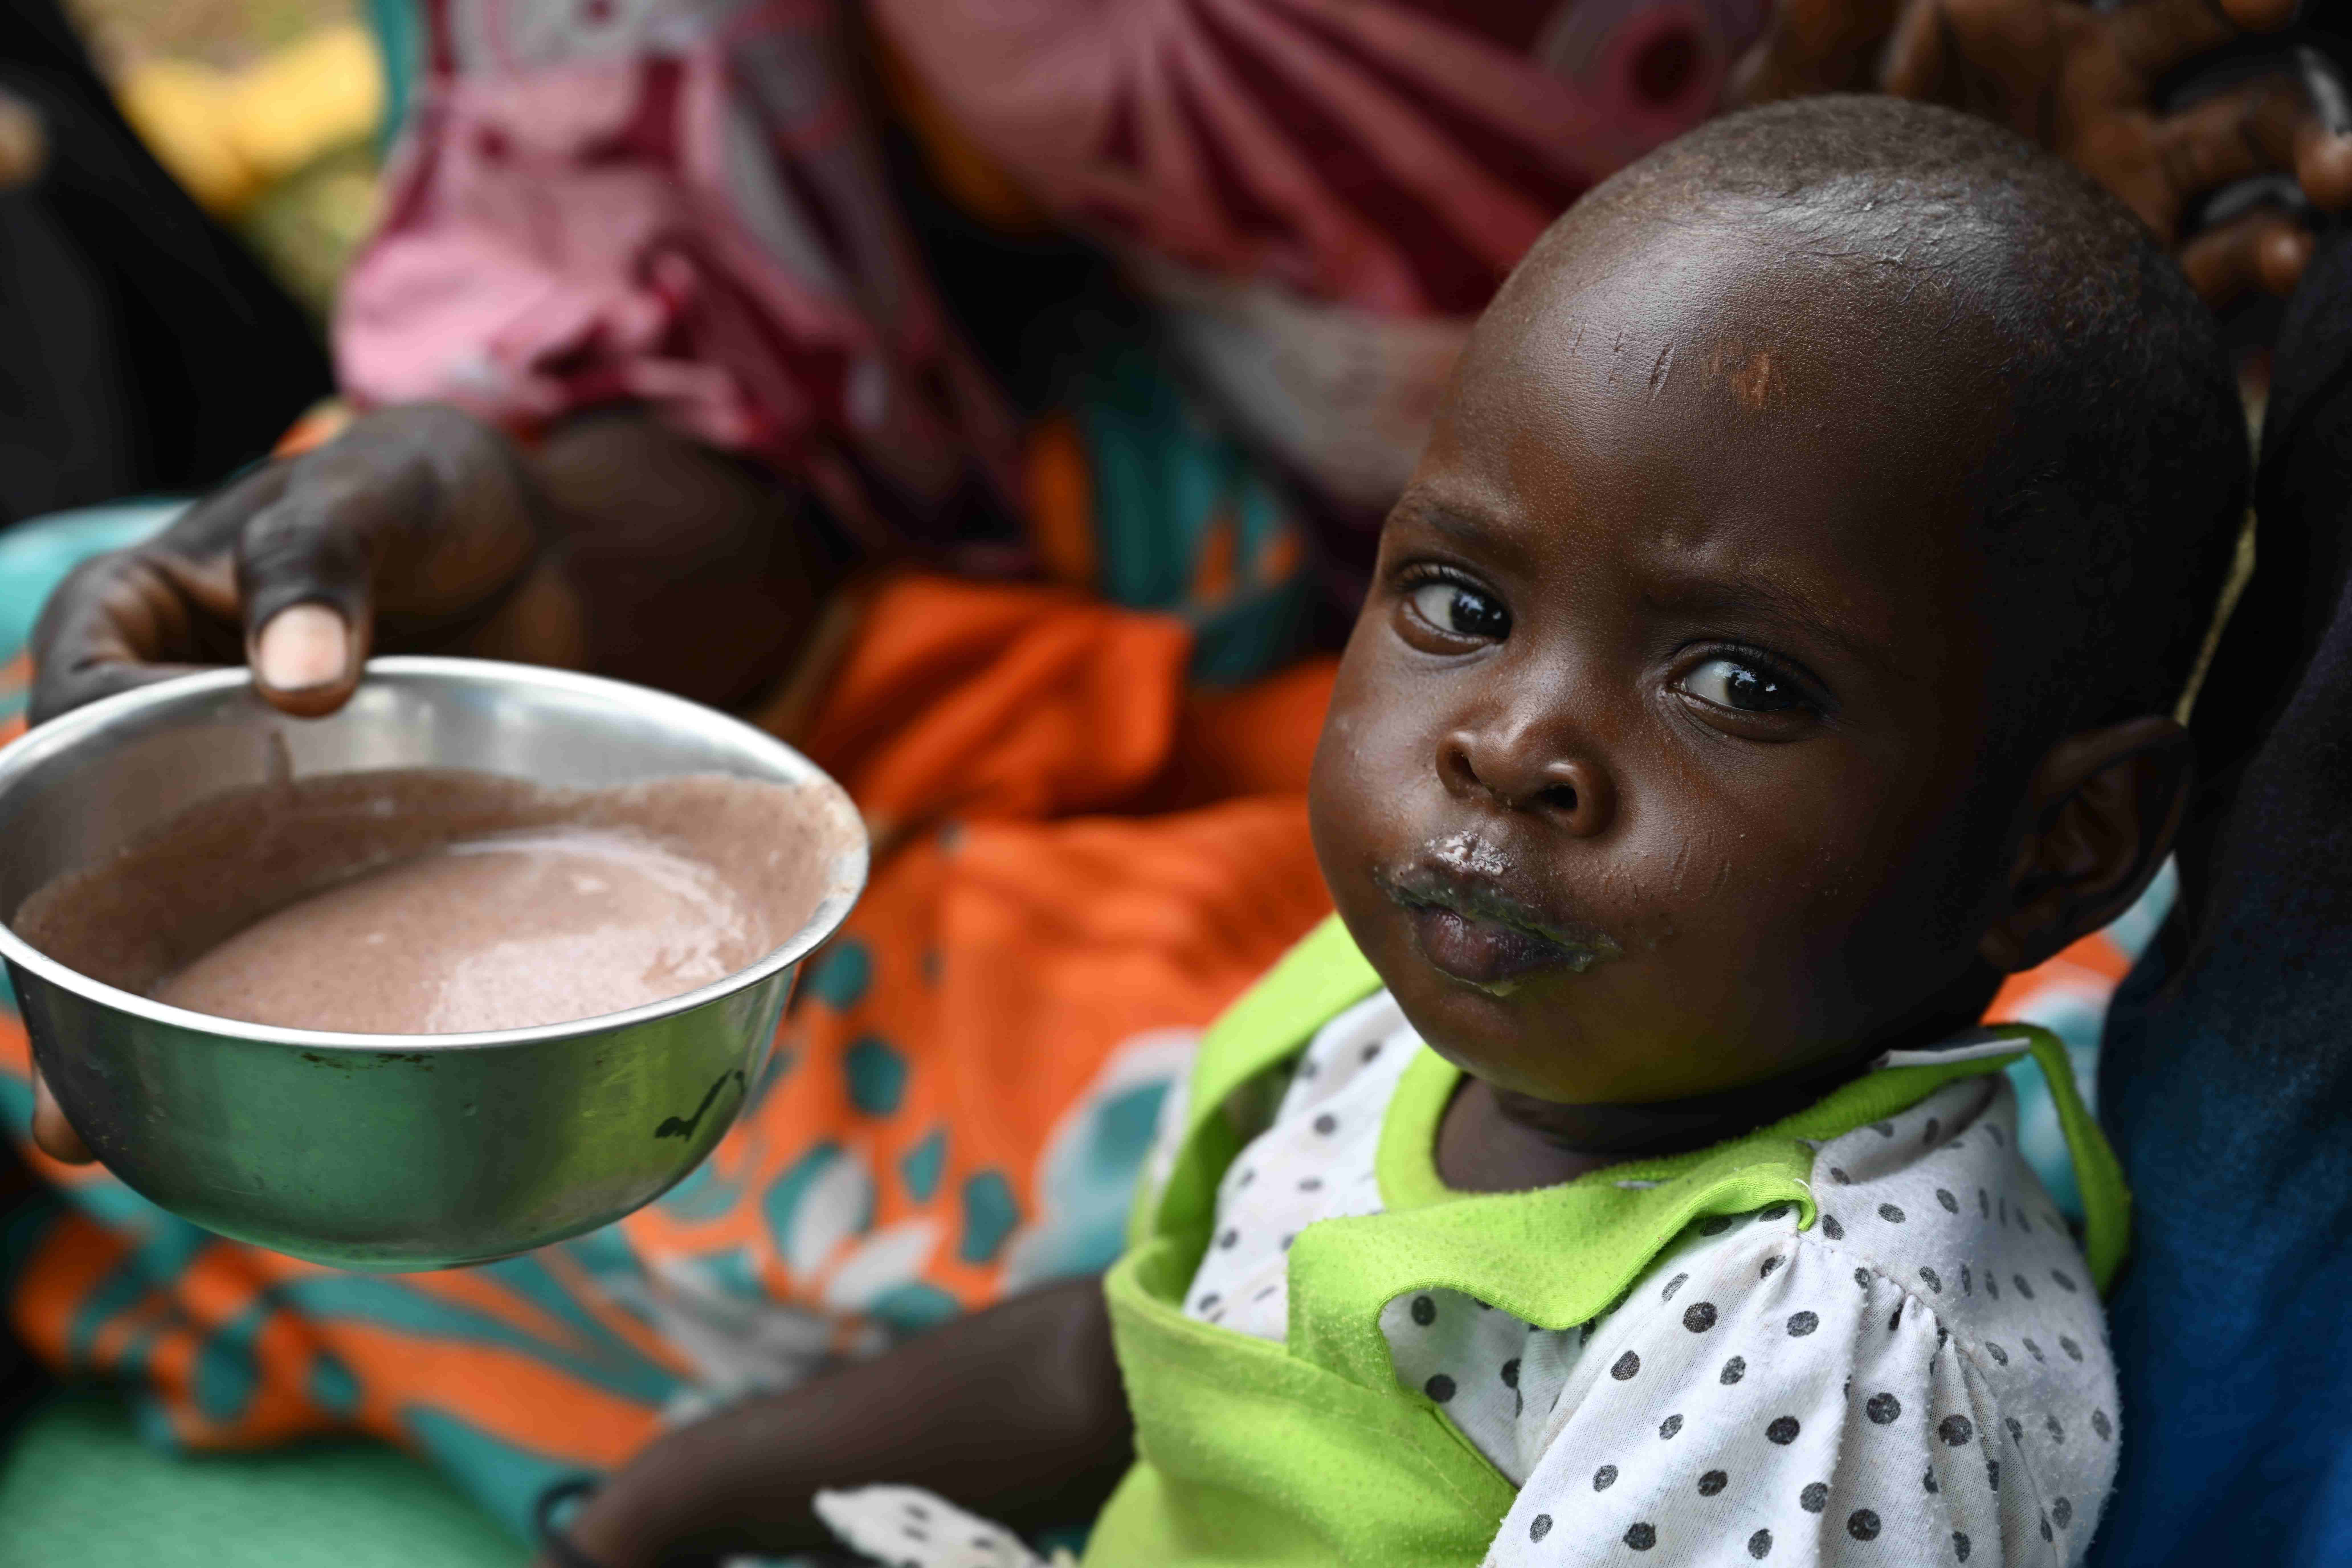 Children eat a nutritious meal, in the village of Golonti, in the Guéra Region of Chad.